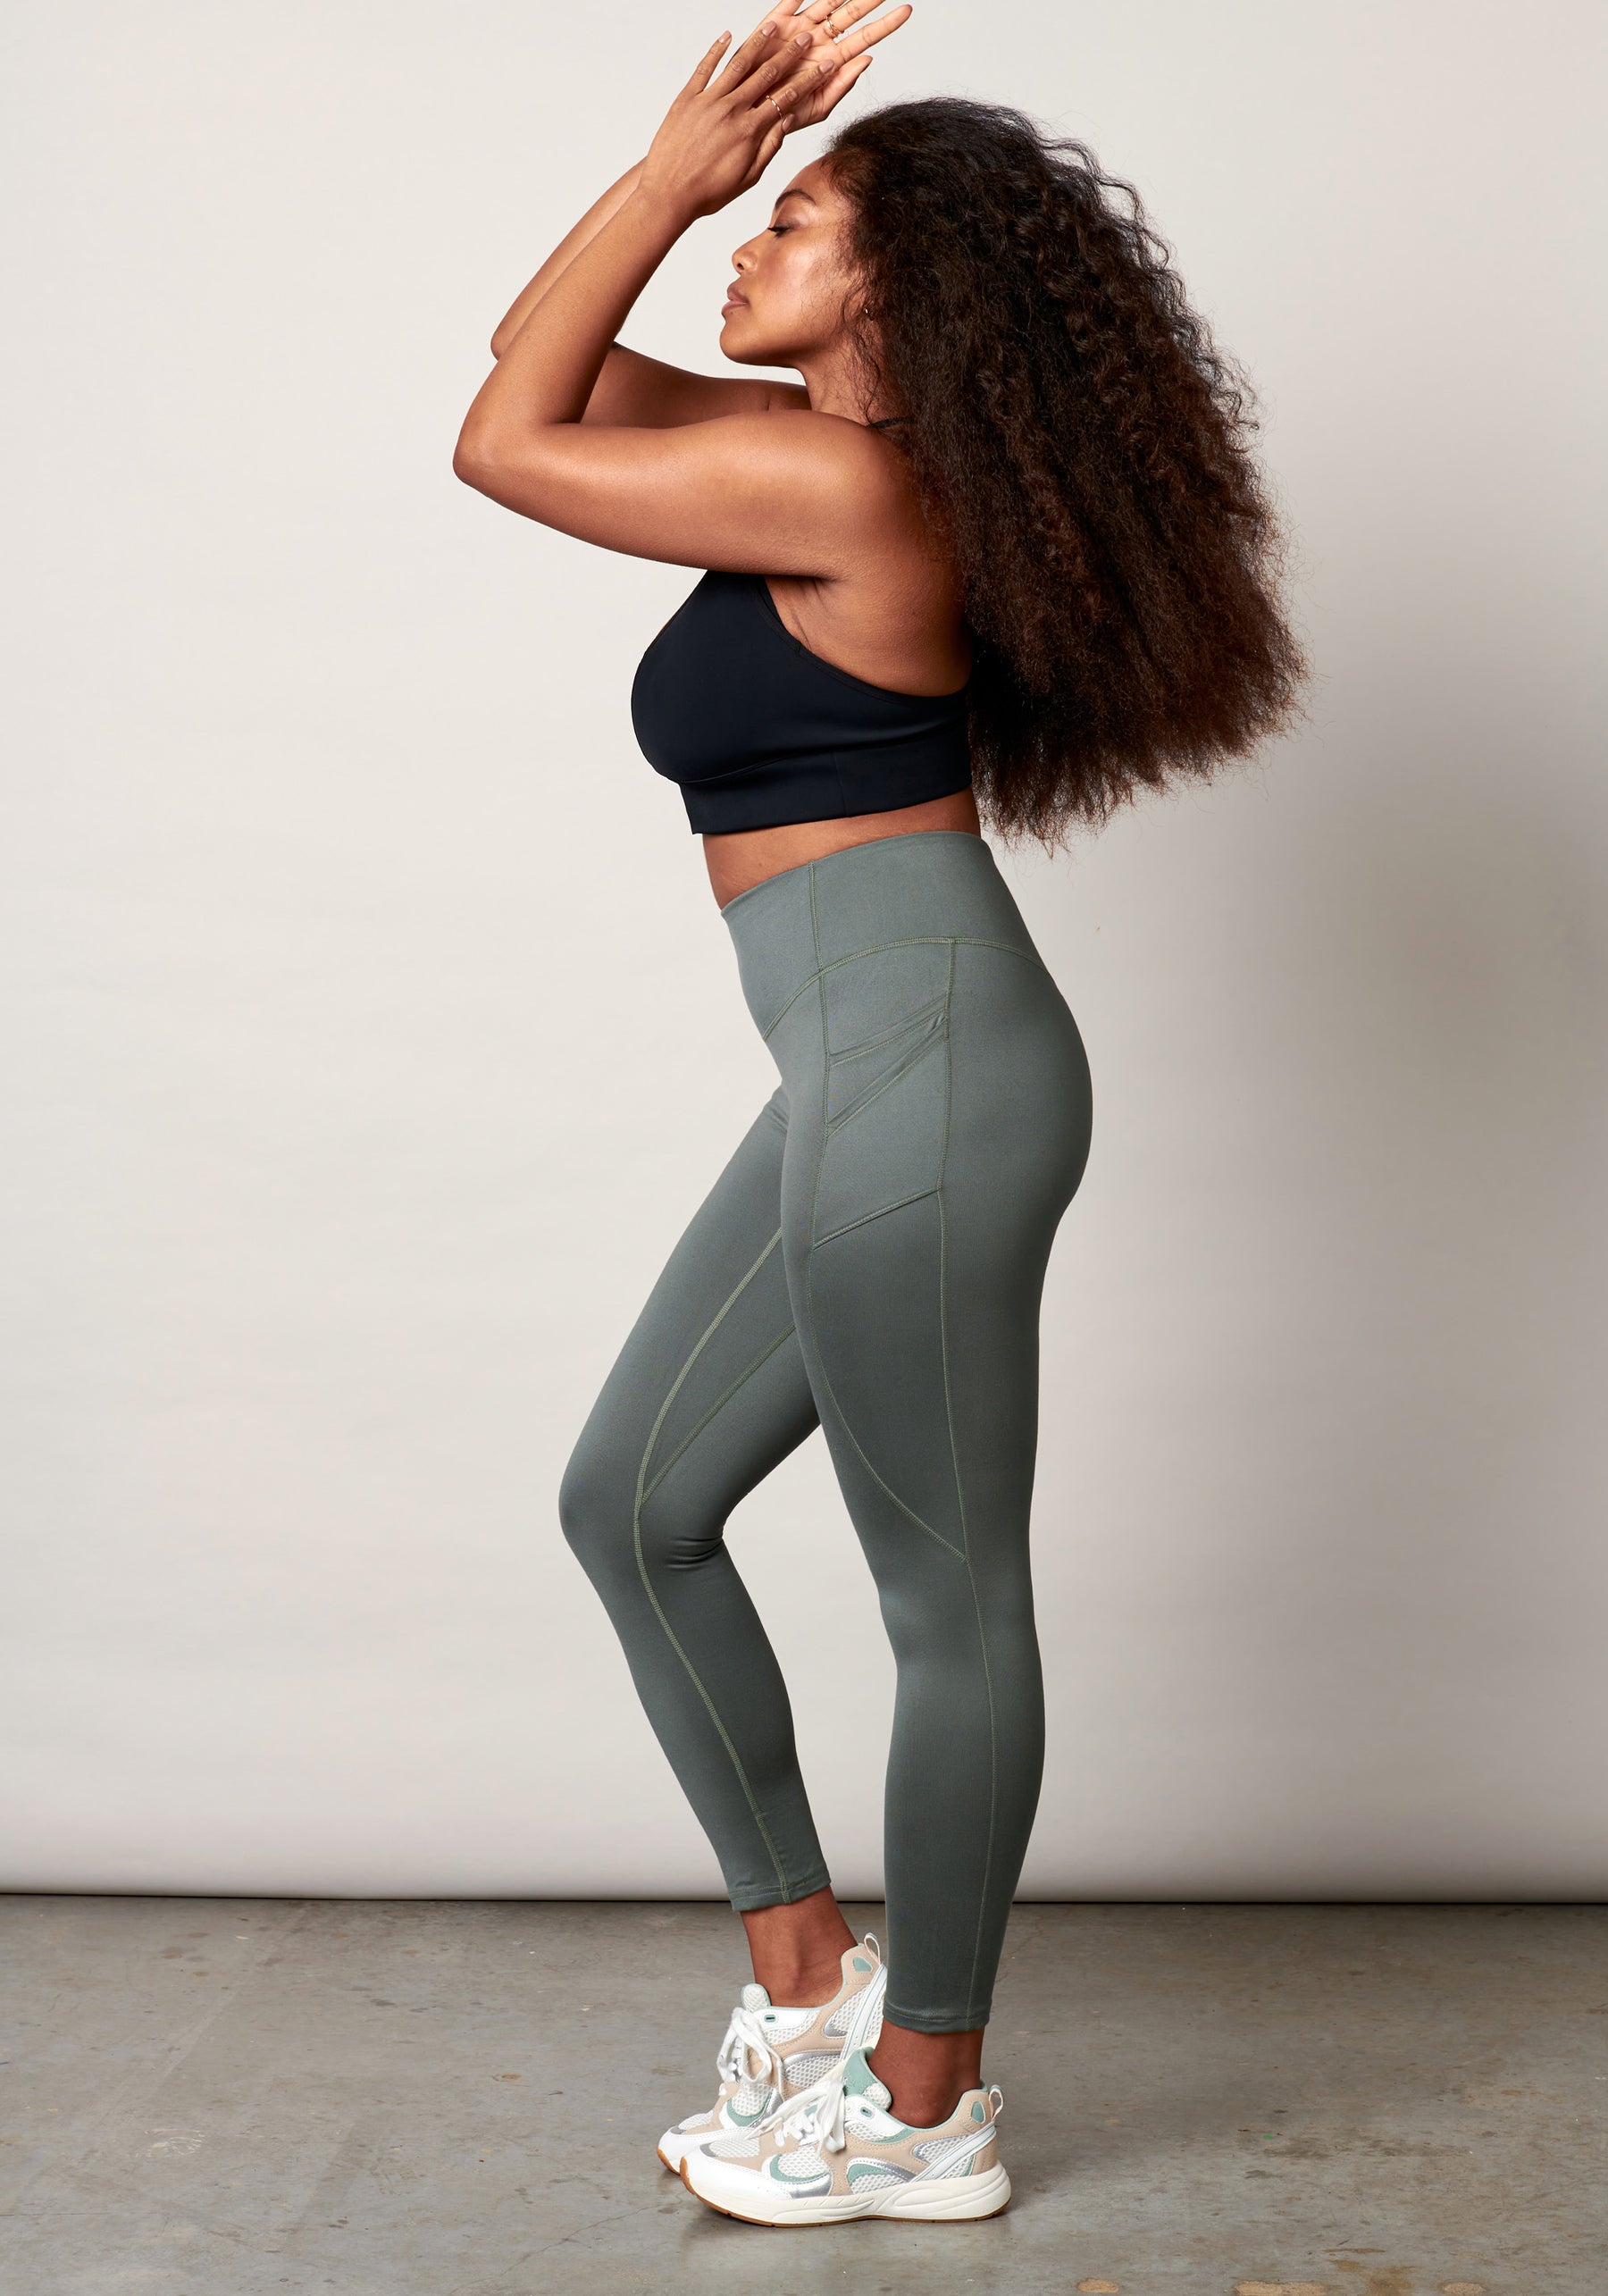 Forest Green Everyday Legging - 7/8 length - Mama Movement